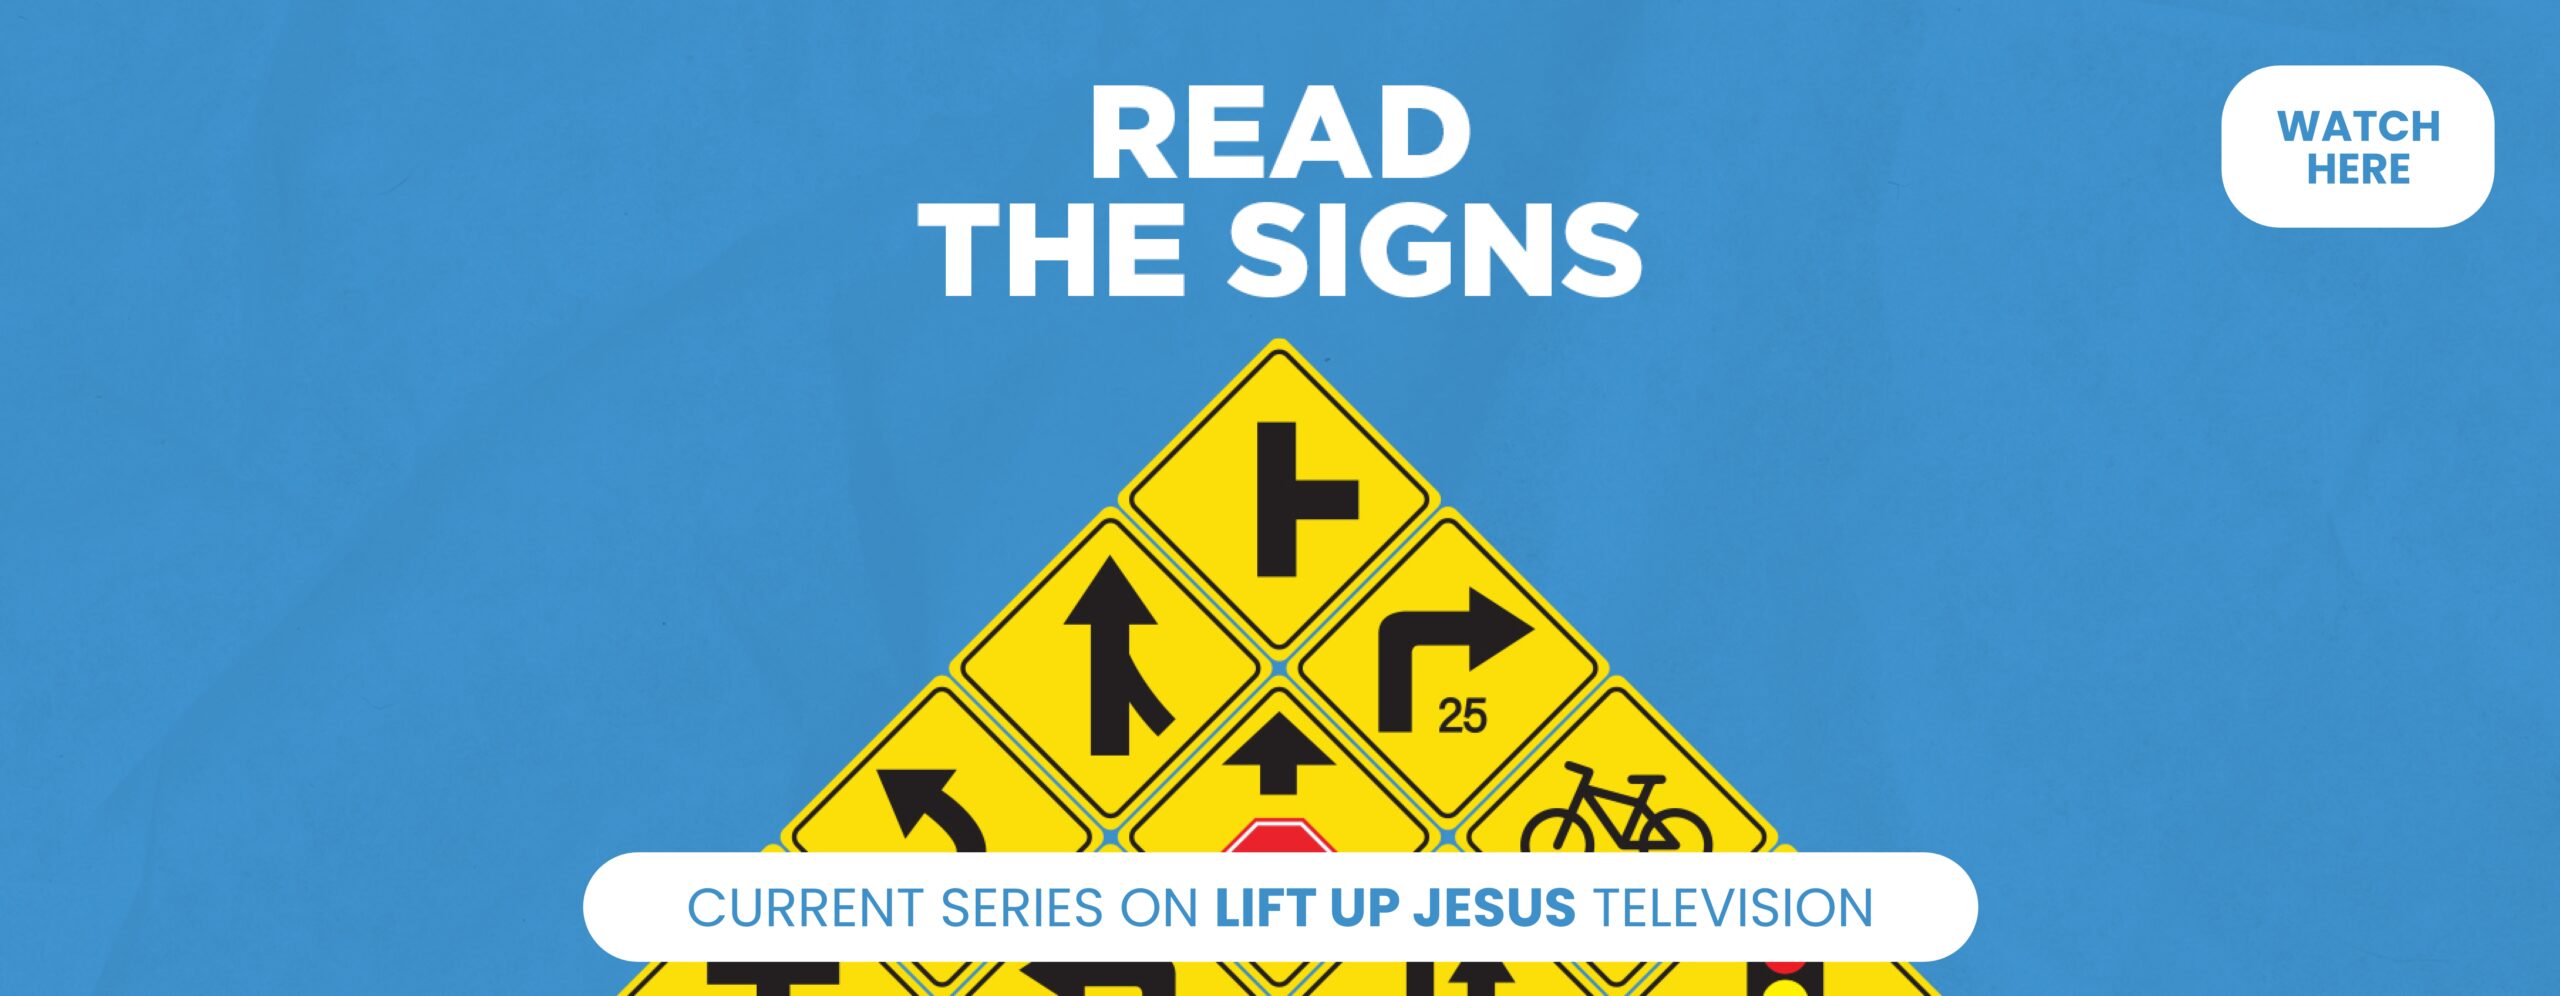 LUJ-Read-The-Signs-Watch-Here1800x700-scaled